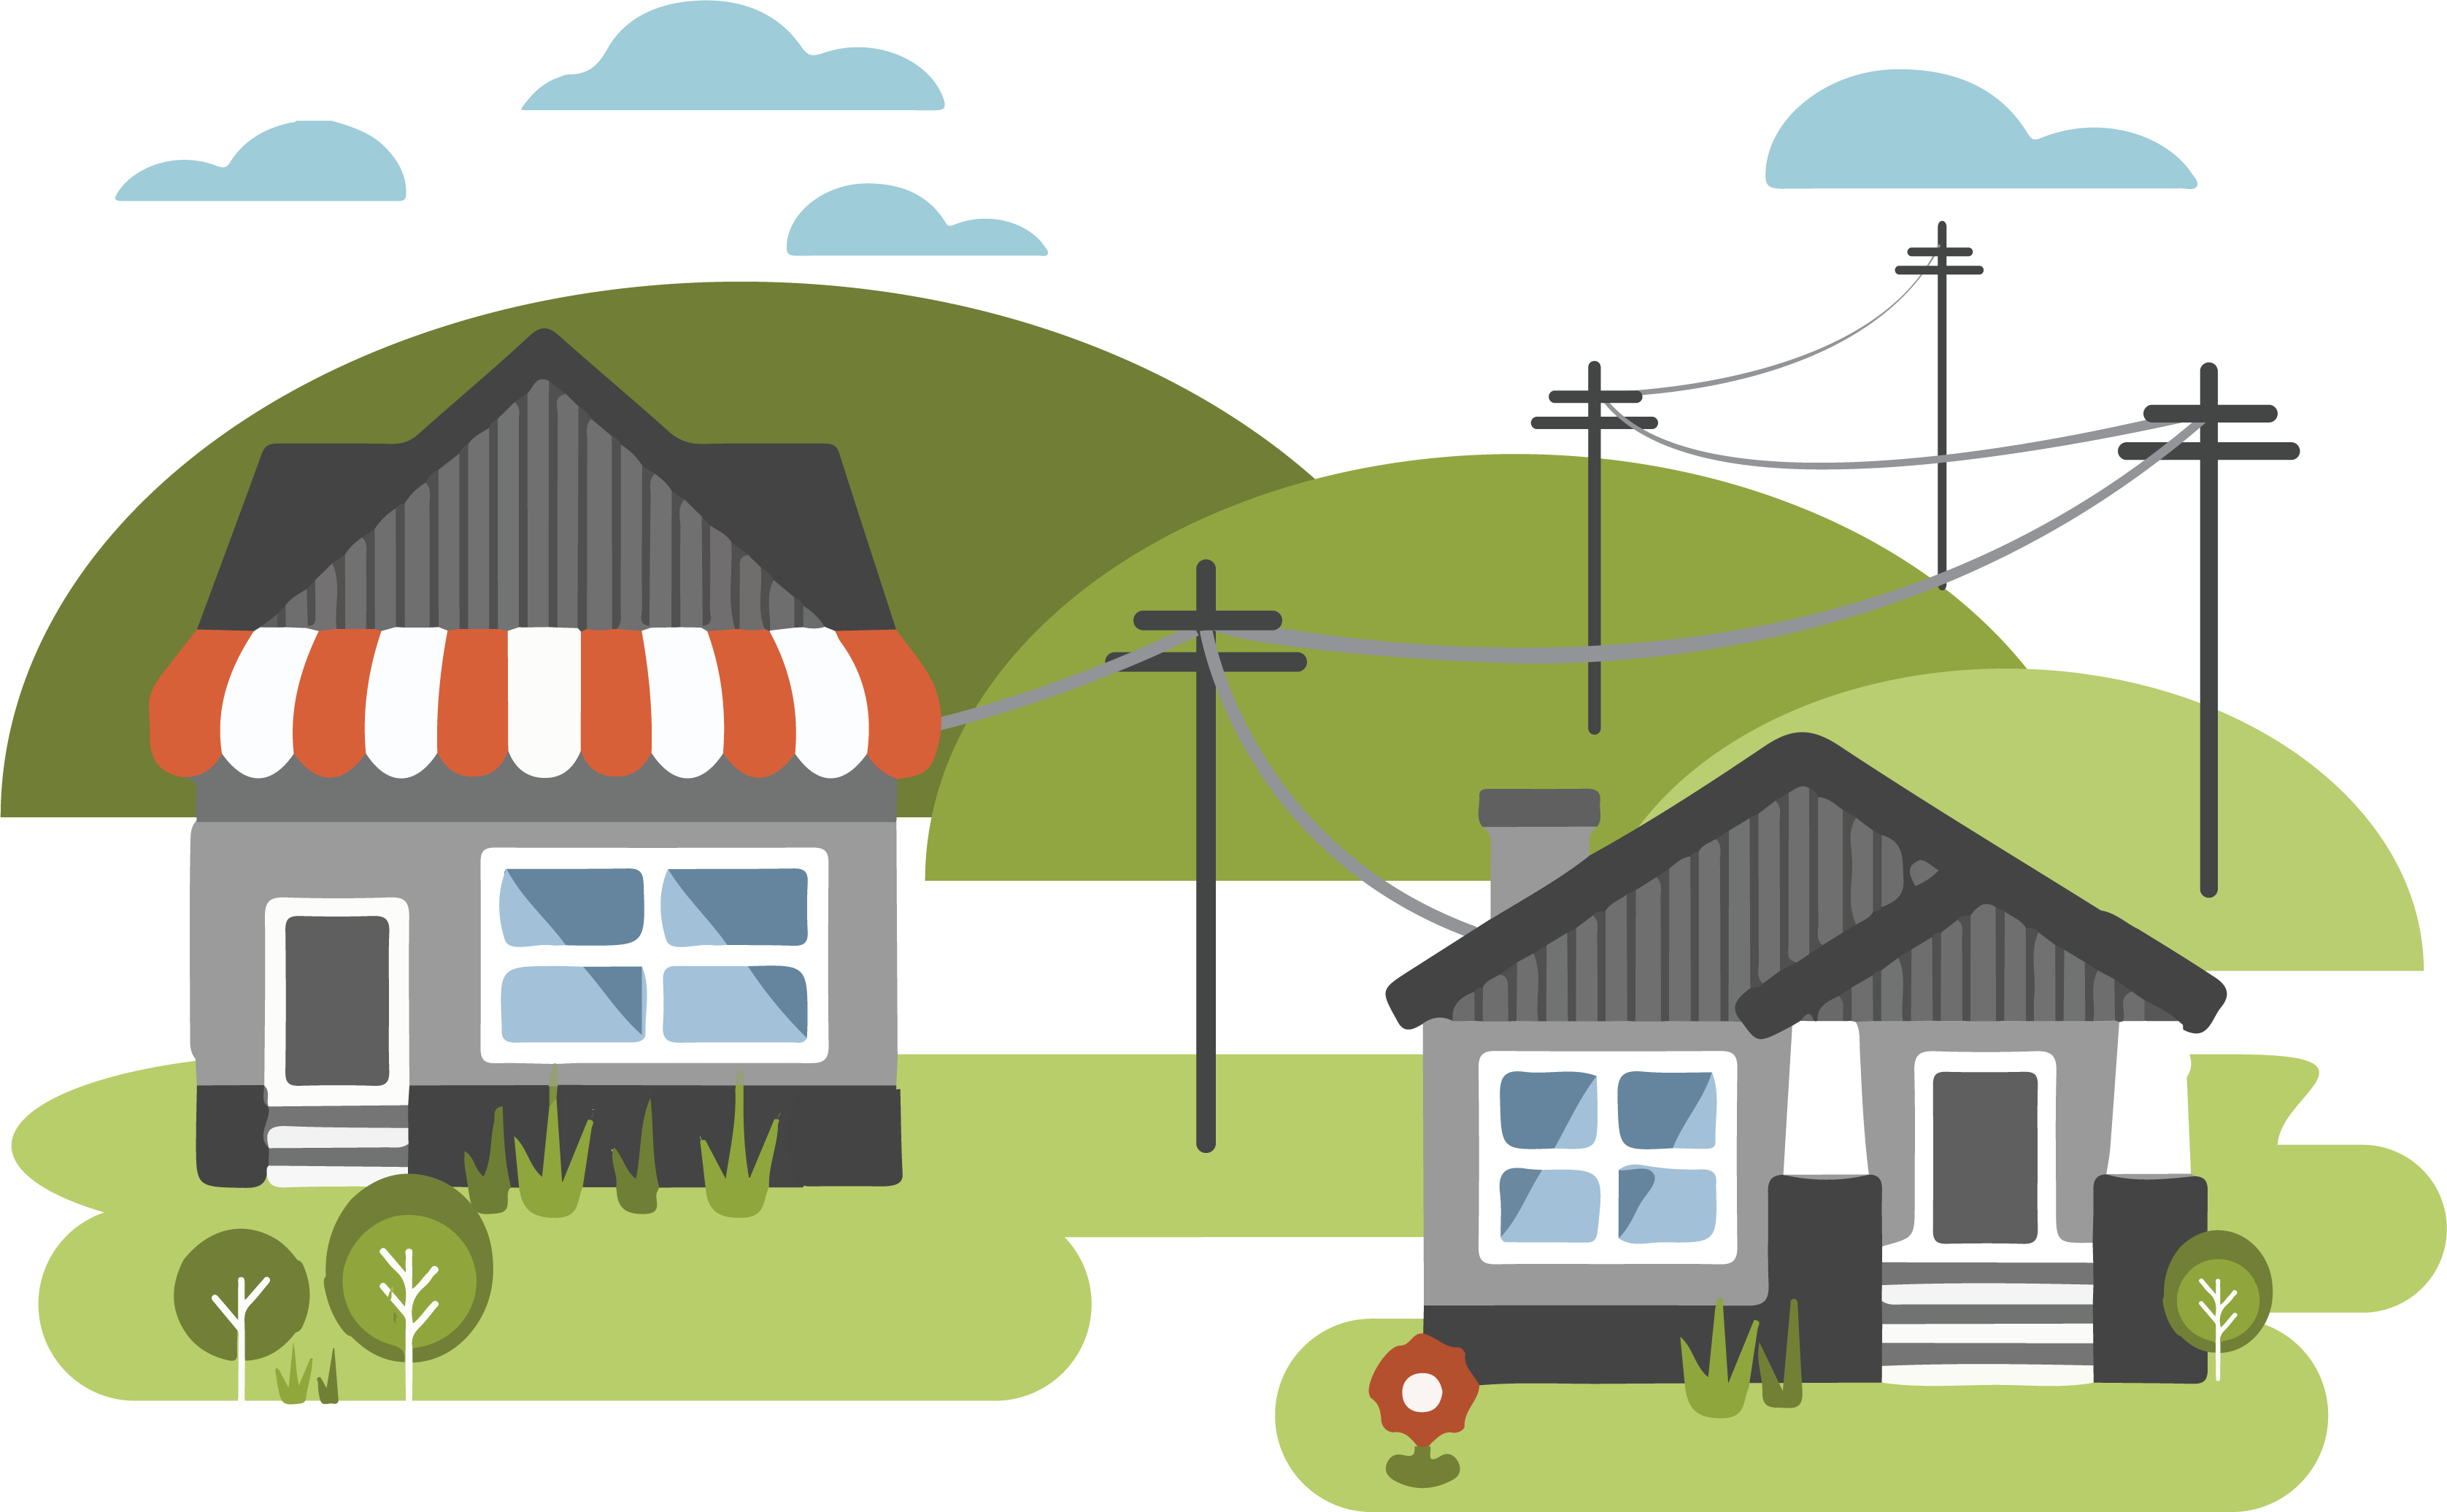 A graphic of a house and a business with utility poles behind them